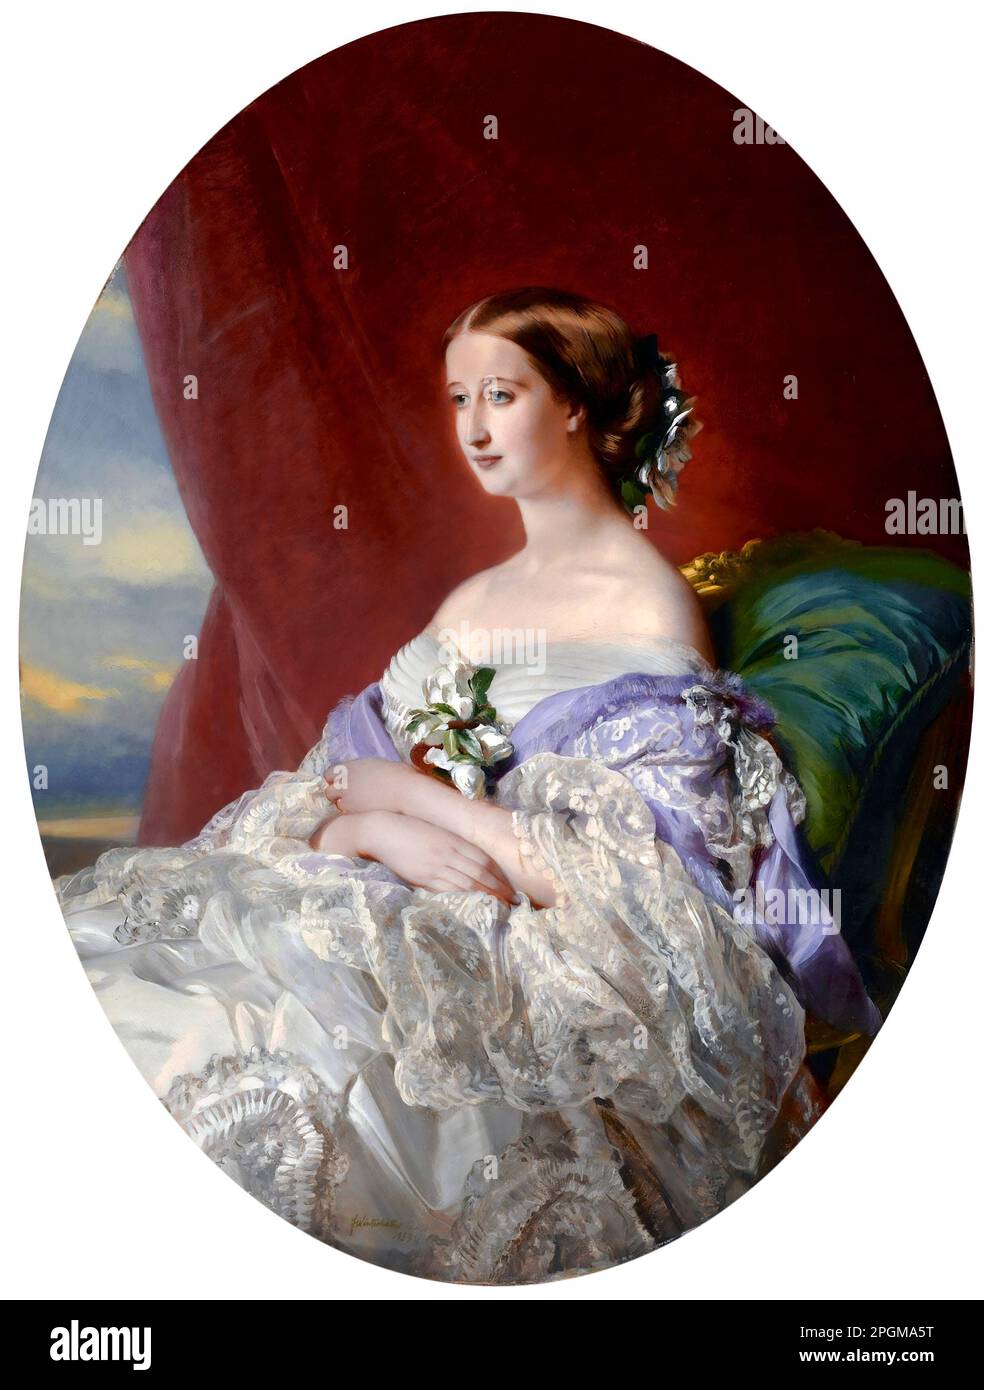 Empress Eugenie by Franz Xaver Winterhalter (1805-1873), oil on canvas, 1854. Doña María Eugenia Ignacia Agustina de Palafox y Kirkpatrick, 19th Countess of Teba, 16th Marchioness of Ardales (1826 -1920), known as Eugénie de Montijo  was Empress of the French after her marriage to Emperor Napoleon III on 30 January 1853 Stock Photo